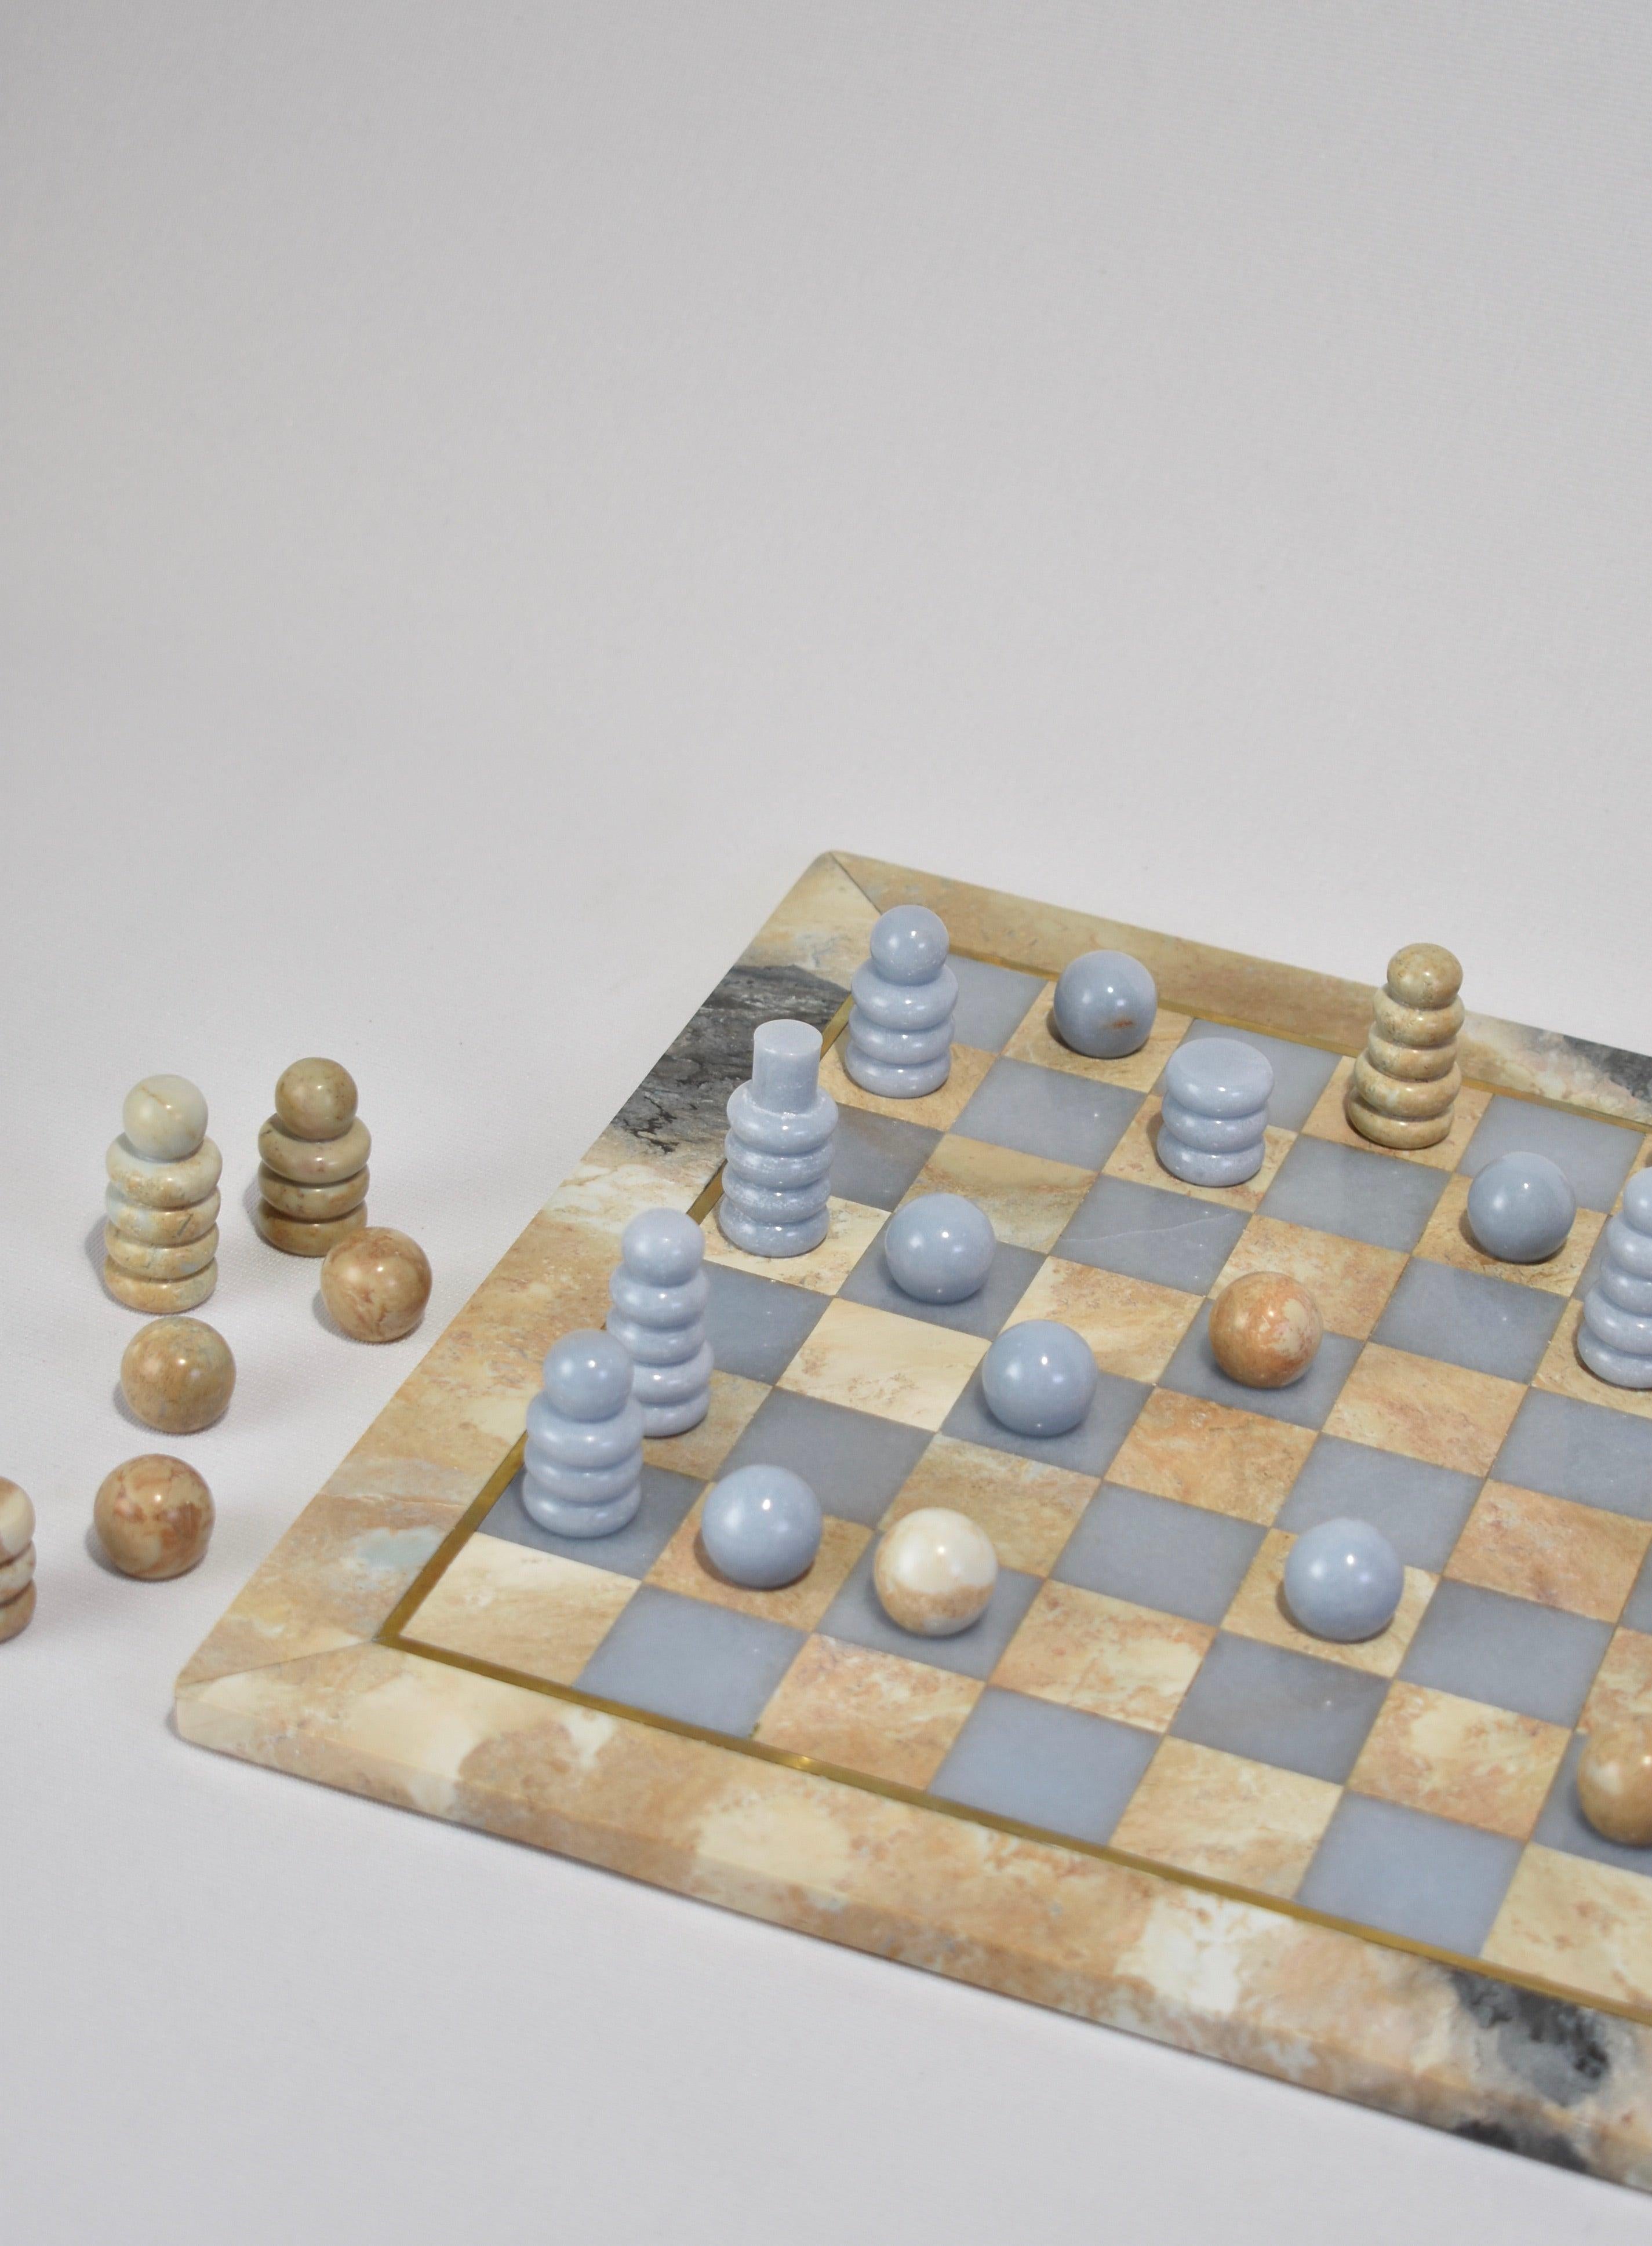 Introducing the Chess Set by Casa Shop, the second design in our stone collection handmade by artisans in Perú. 

Each set features hand-carved pieces and a board in Soapstone and Soft Blue Celestine. The board is accented in brass inlay and comes